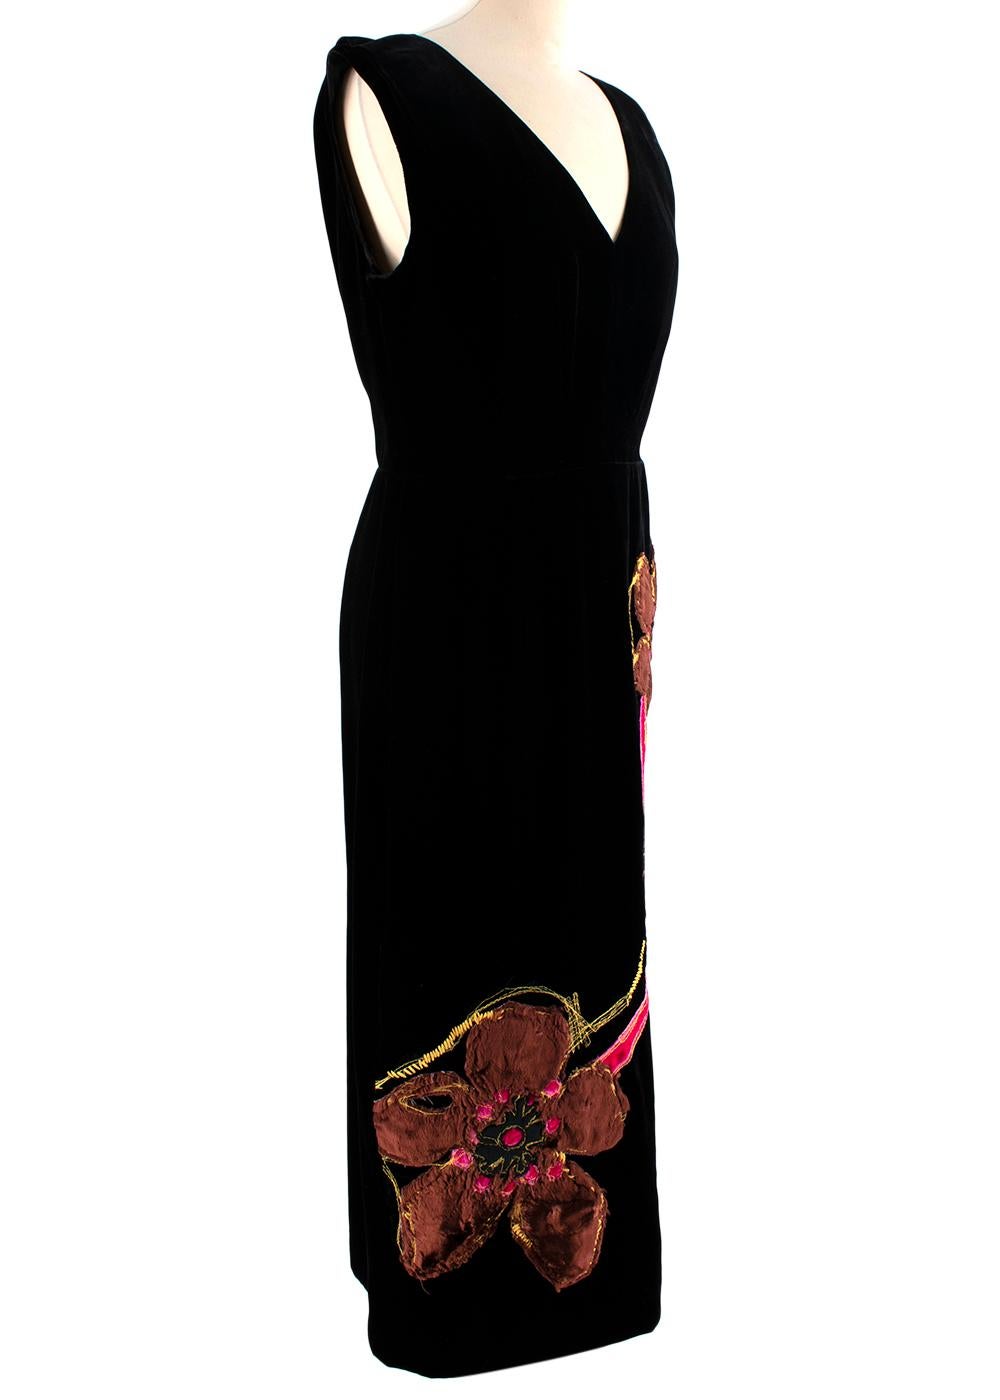 Prada Black Velvet Midi Dress With Applique Flower

- V-neckline 
- Black invisible zipper
- Vent at the back 
- sleeveless  

Material: 
81% viscose, 18% silk, 1% polyamide

Made in Italy 

PLEASE NOTE, THESE ITEMS ARE PRE-OWNED AND MAY SHOW SIGNS